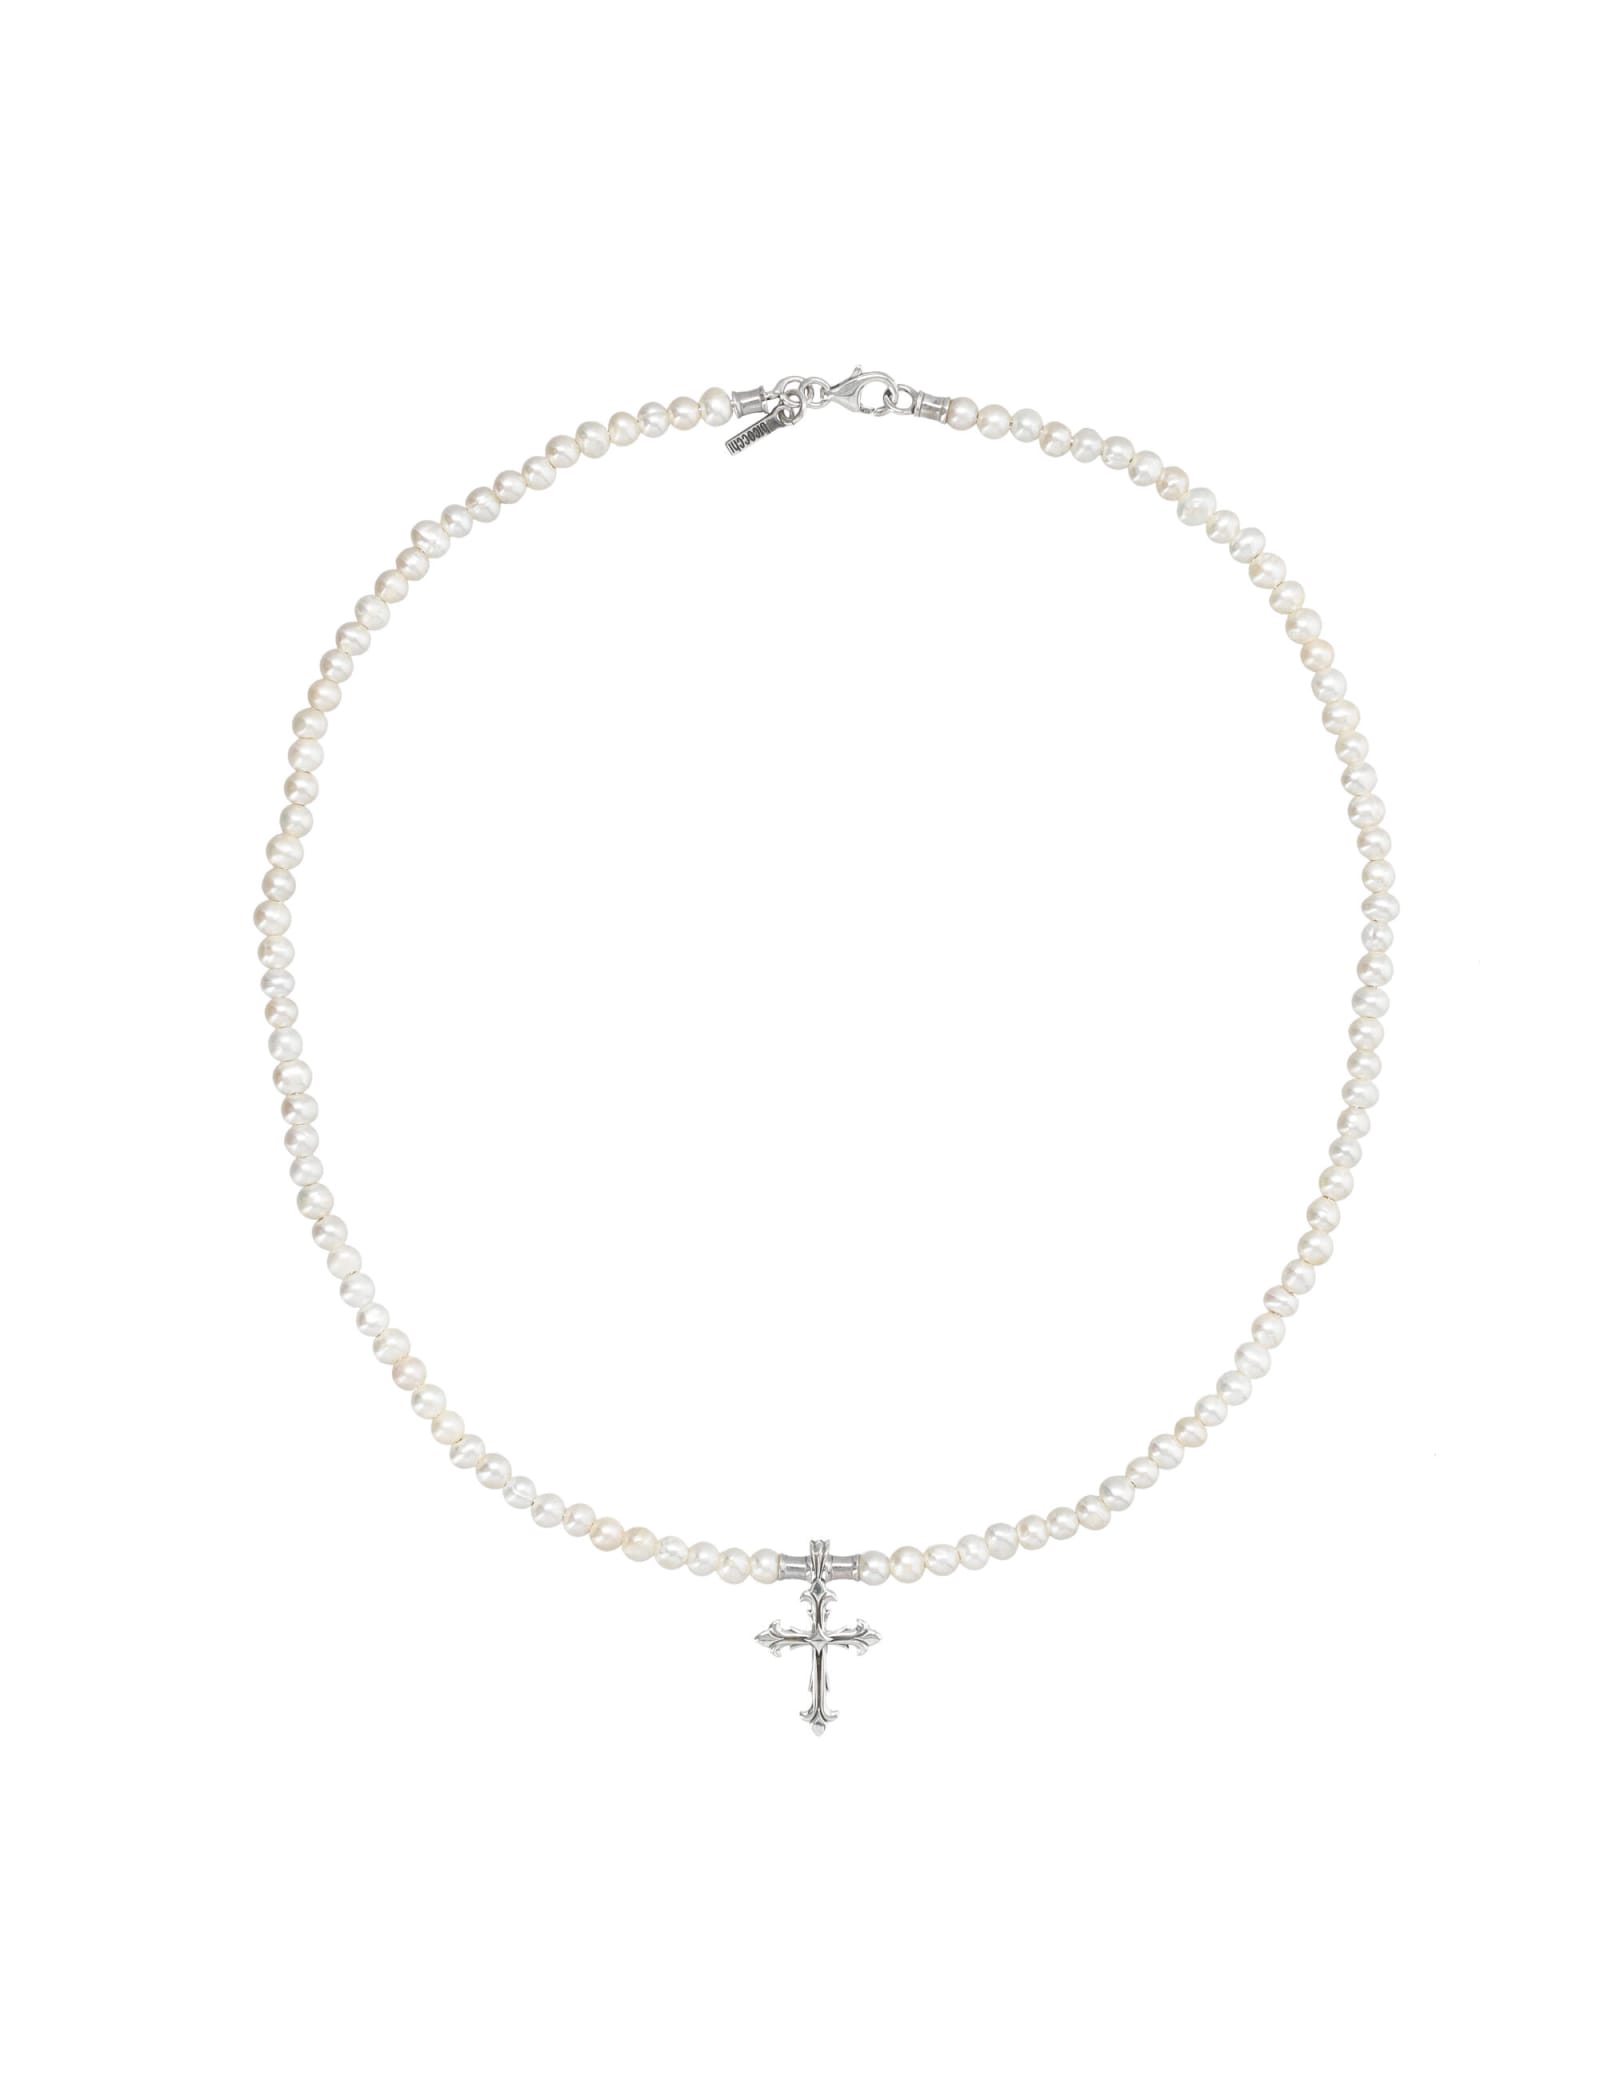 Small Pearl Necklace Cross